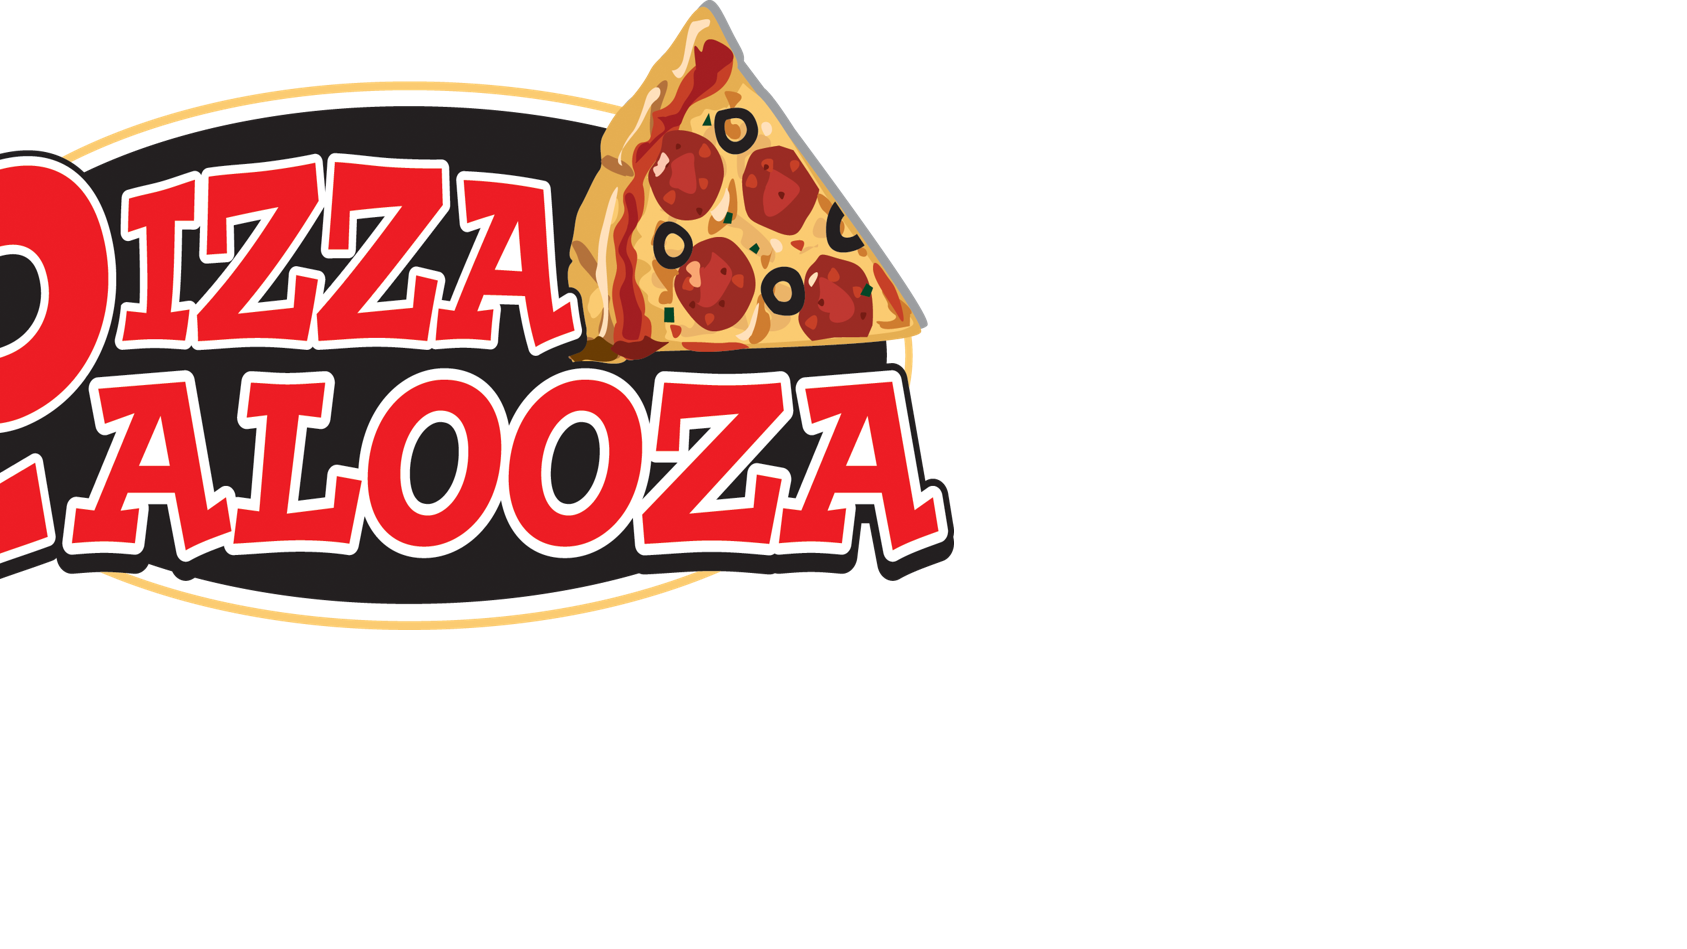 Pizza Palooza lets you be judge, jury and executioner when it comes to